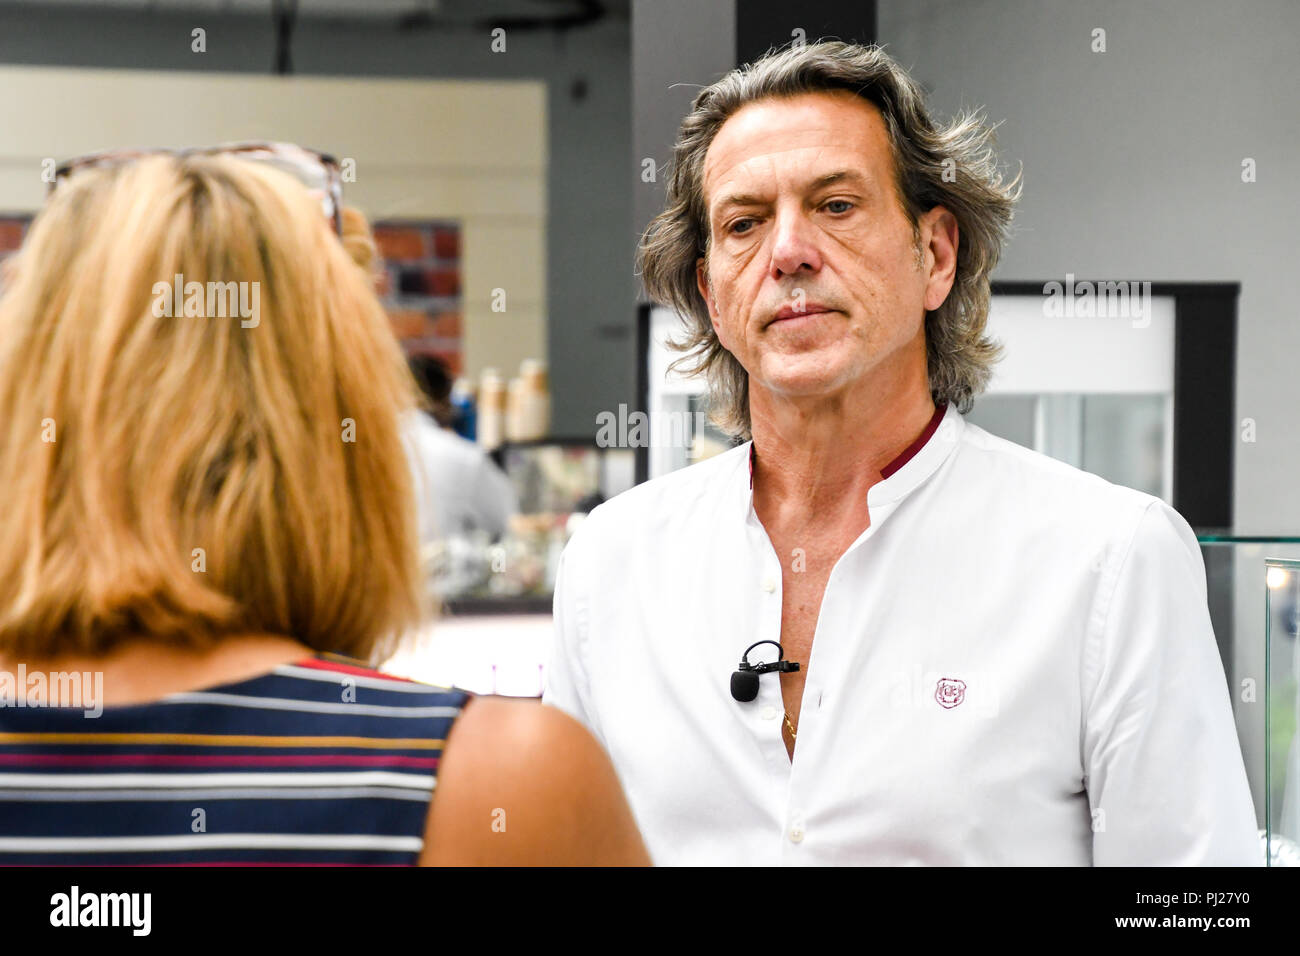 London, UK. 3rd September, 2018. Stephen Webster of Goldsmiths Craft & Design Council interview by reporter at the International Jewellery London 2018, Olympia London, UK. Credit: Picture Capital/Alamy Live News Stock Photo